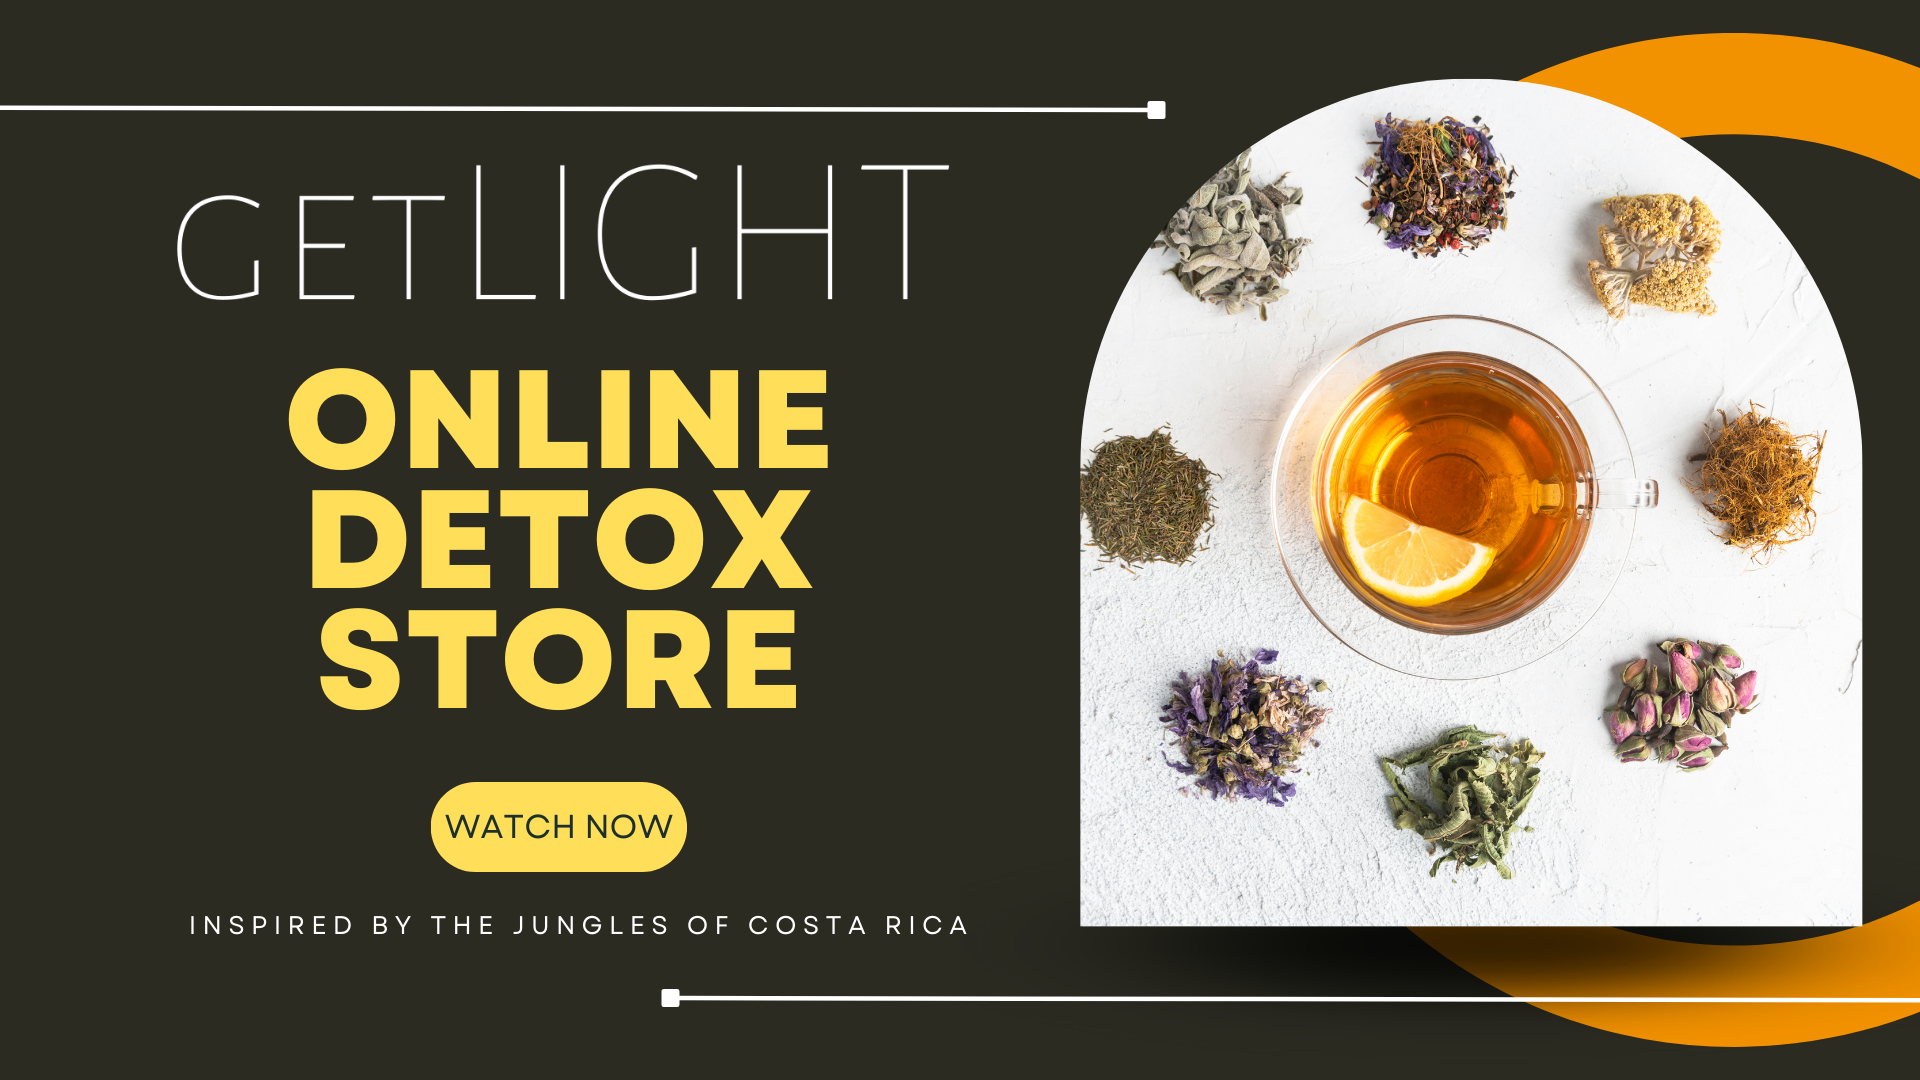 Load video: getlight online detoxification store herbs and supplements are inspired by the jungles of costa rica coaches customers